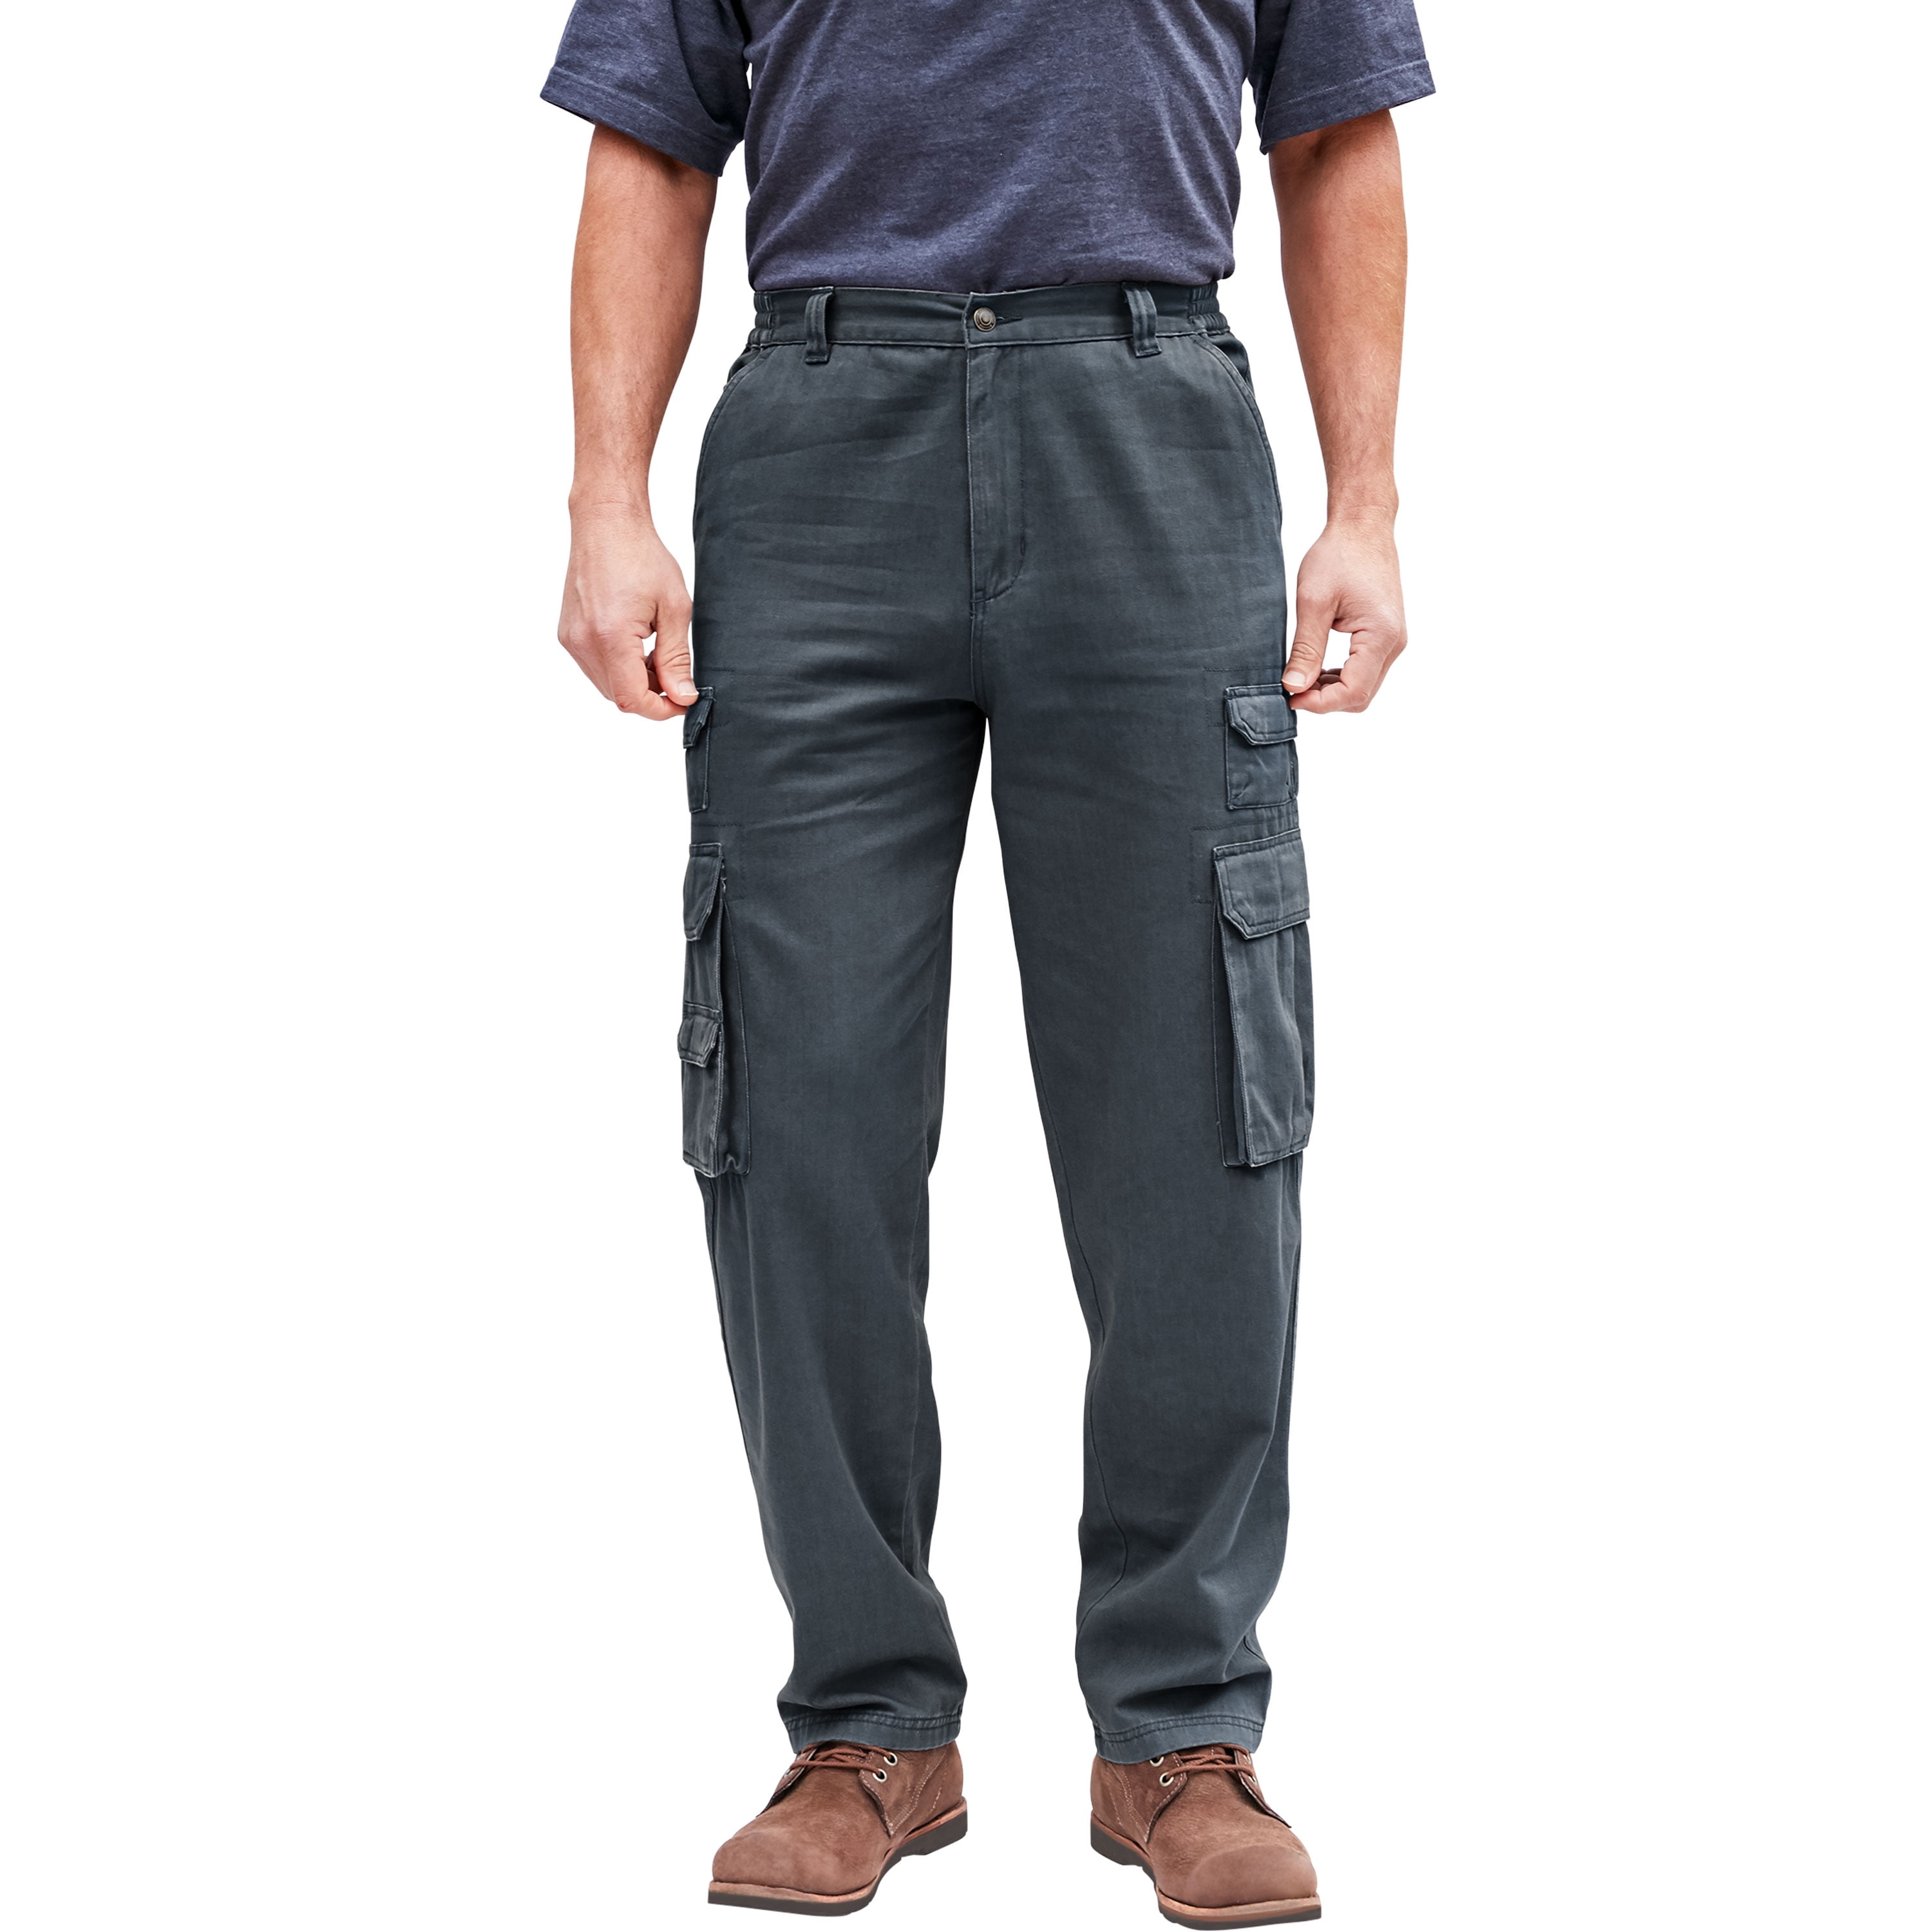 big and tall white cargo pants